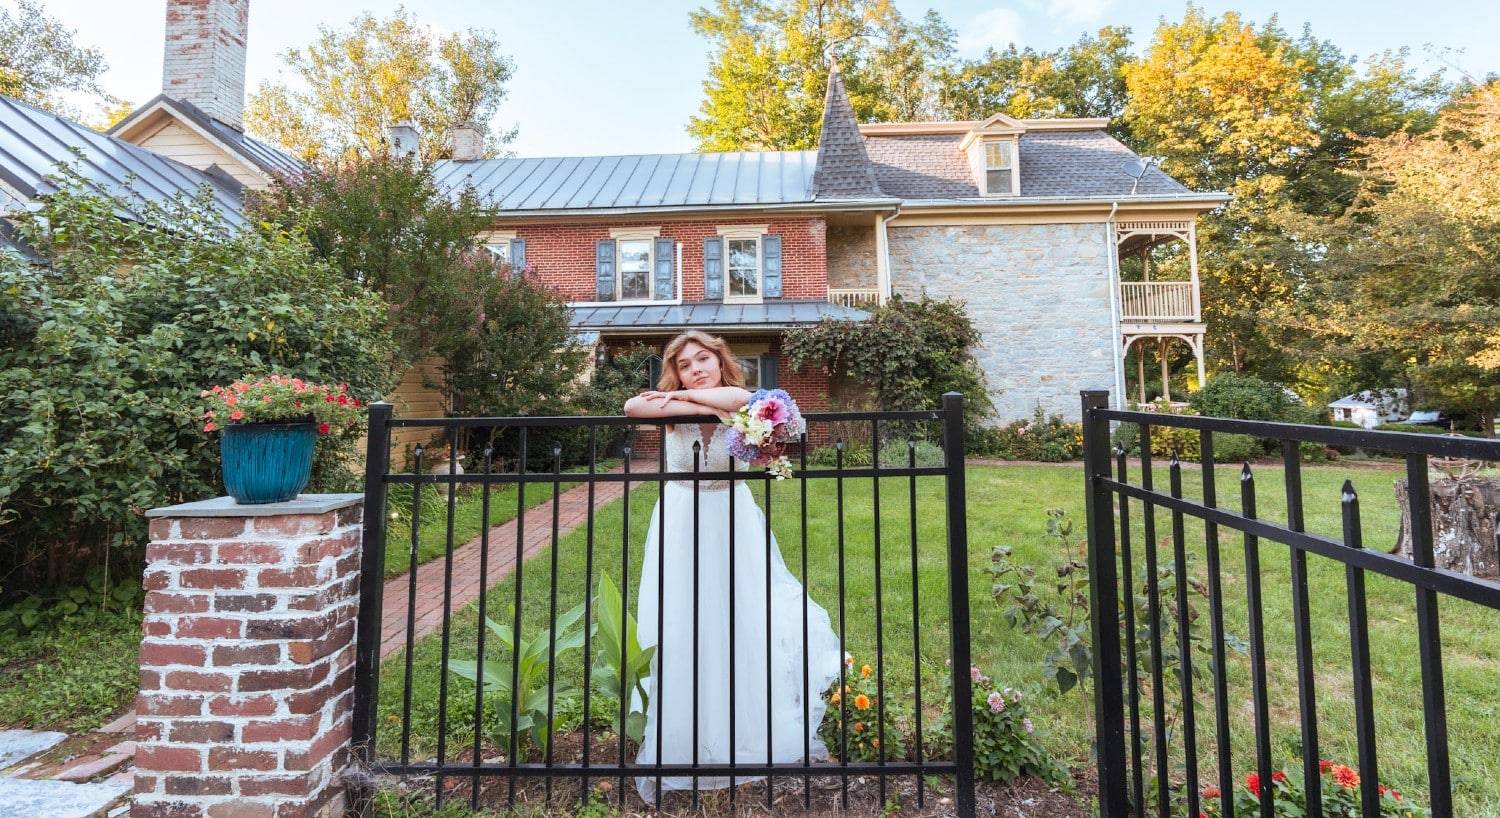 A bride in white with a colorful bouquet standing by a black iron fence in front of a large brick home